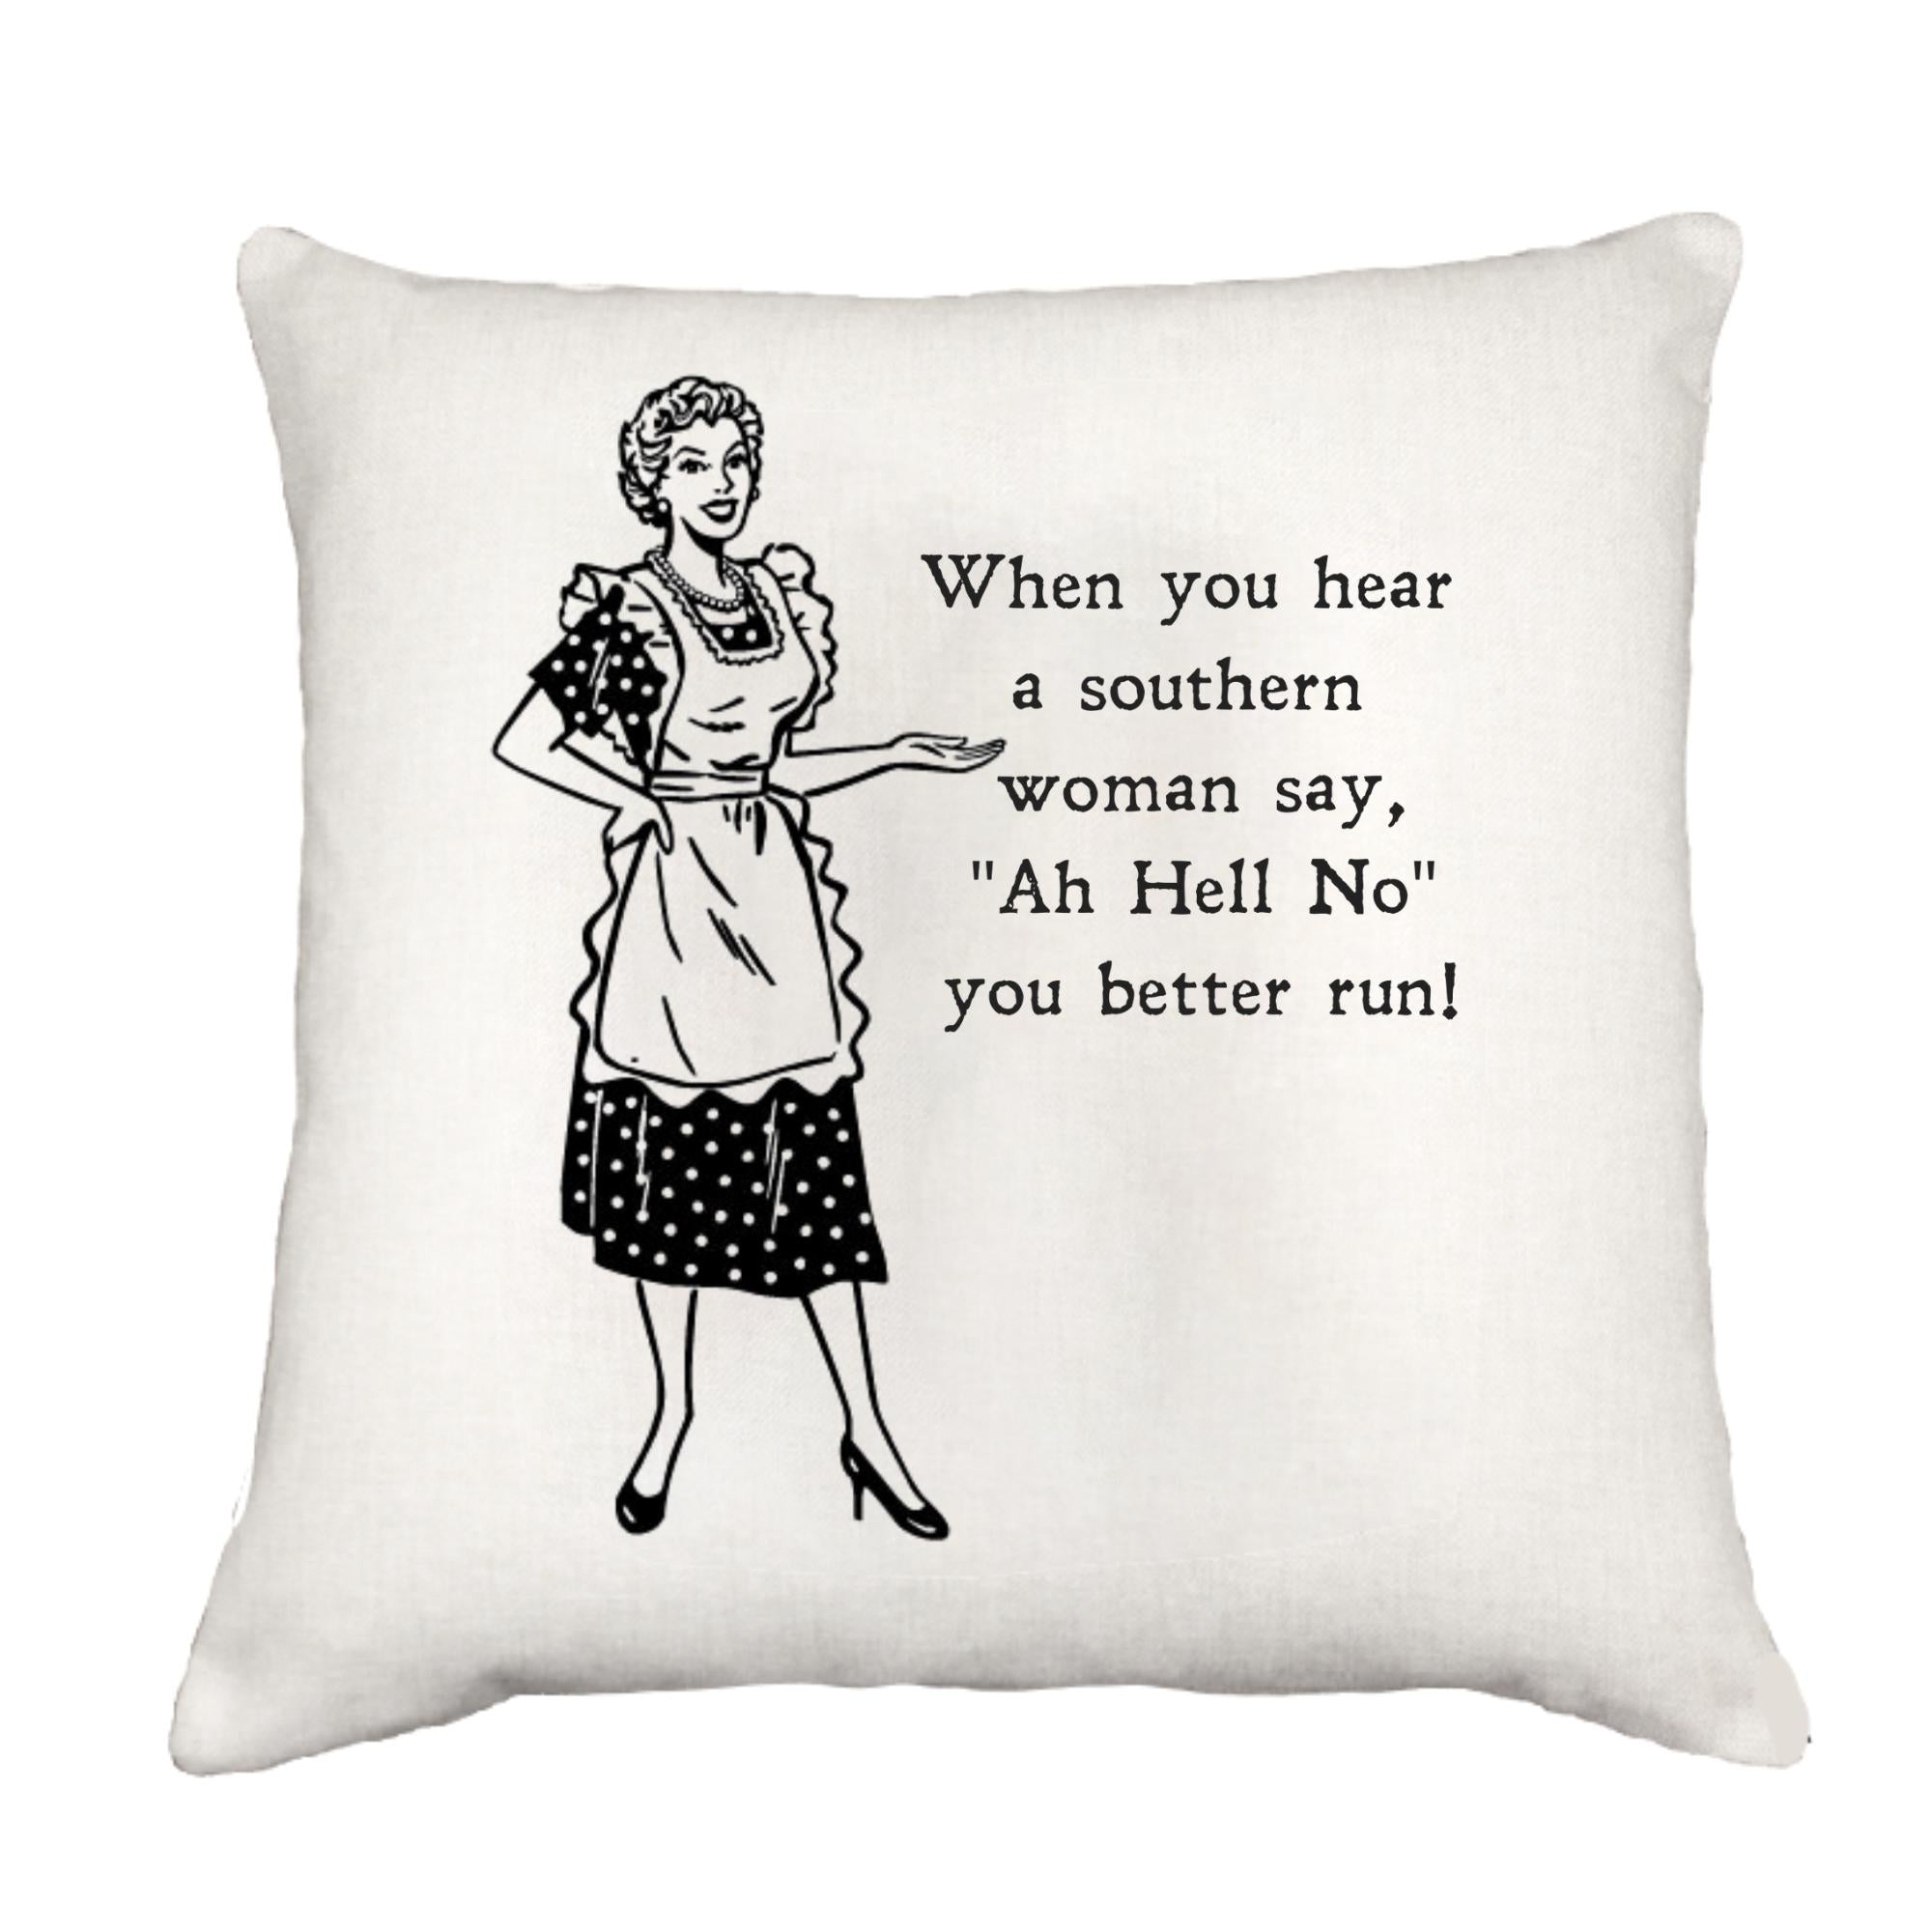 Southern Woman Cottage Pillow Throw/Decorative Pillow - Southern Sisters